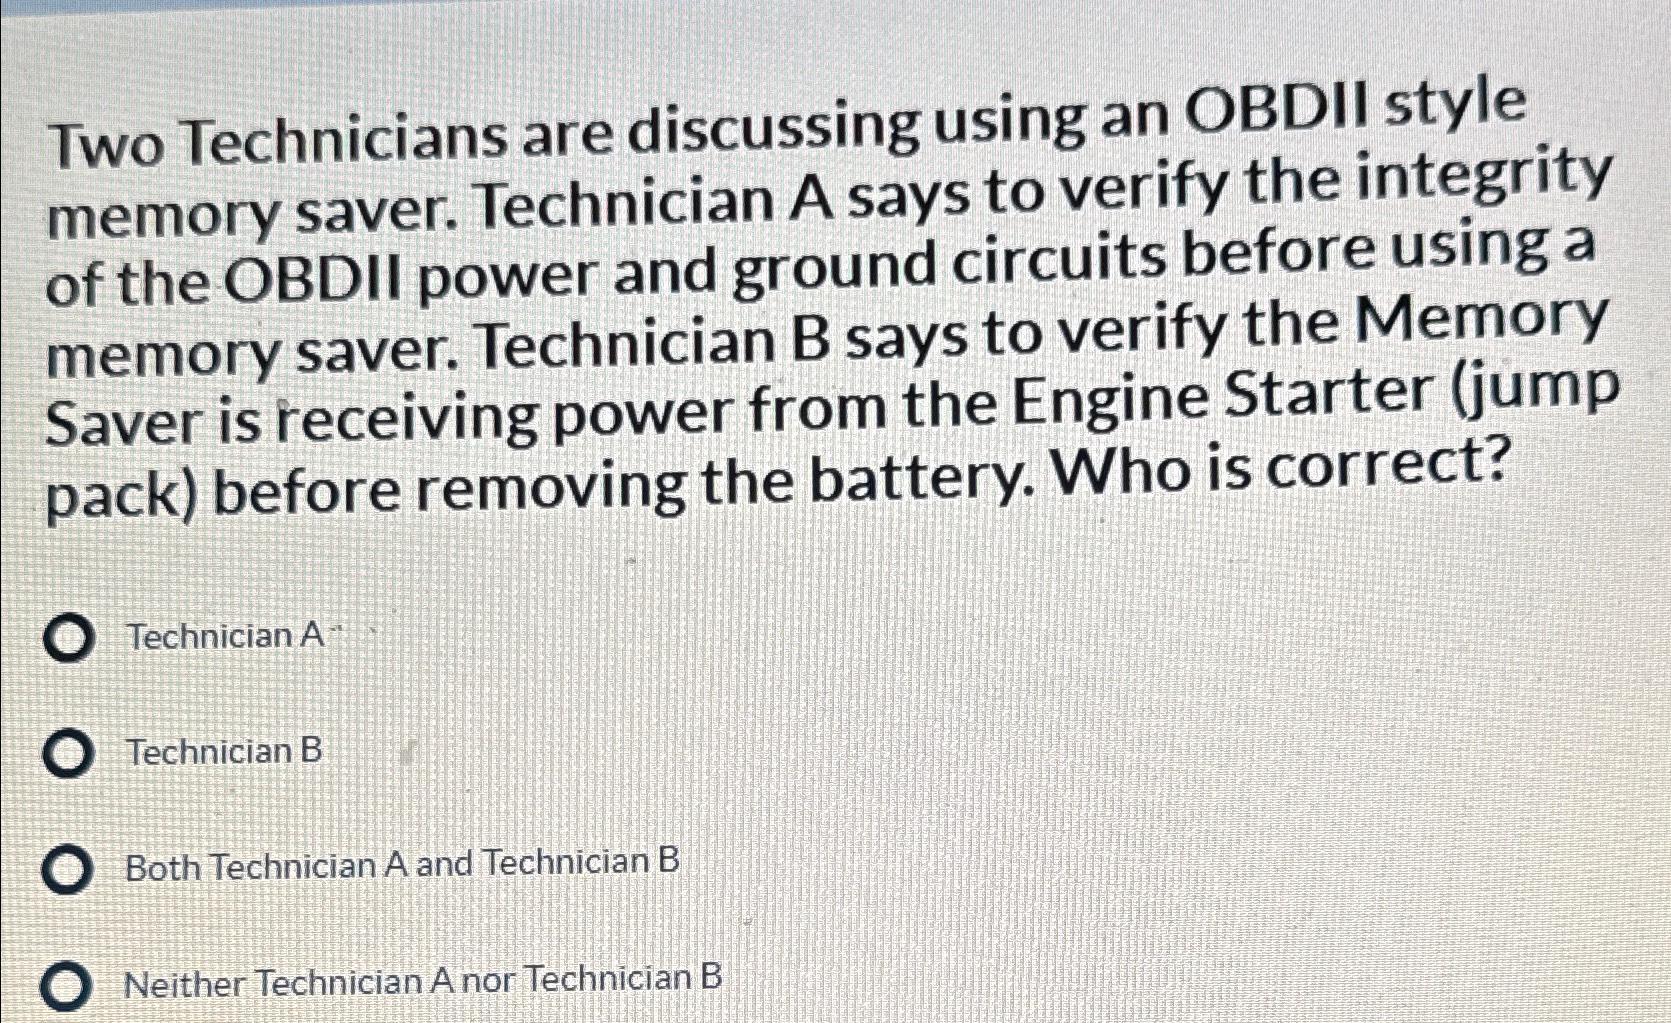 Two Technicians are discussing using an OBDII style memory saver. Technician A says to verify the integrity